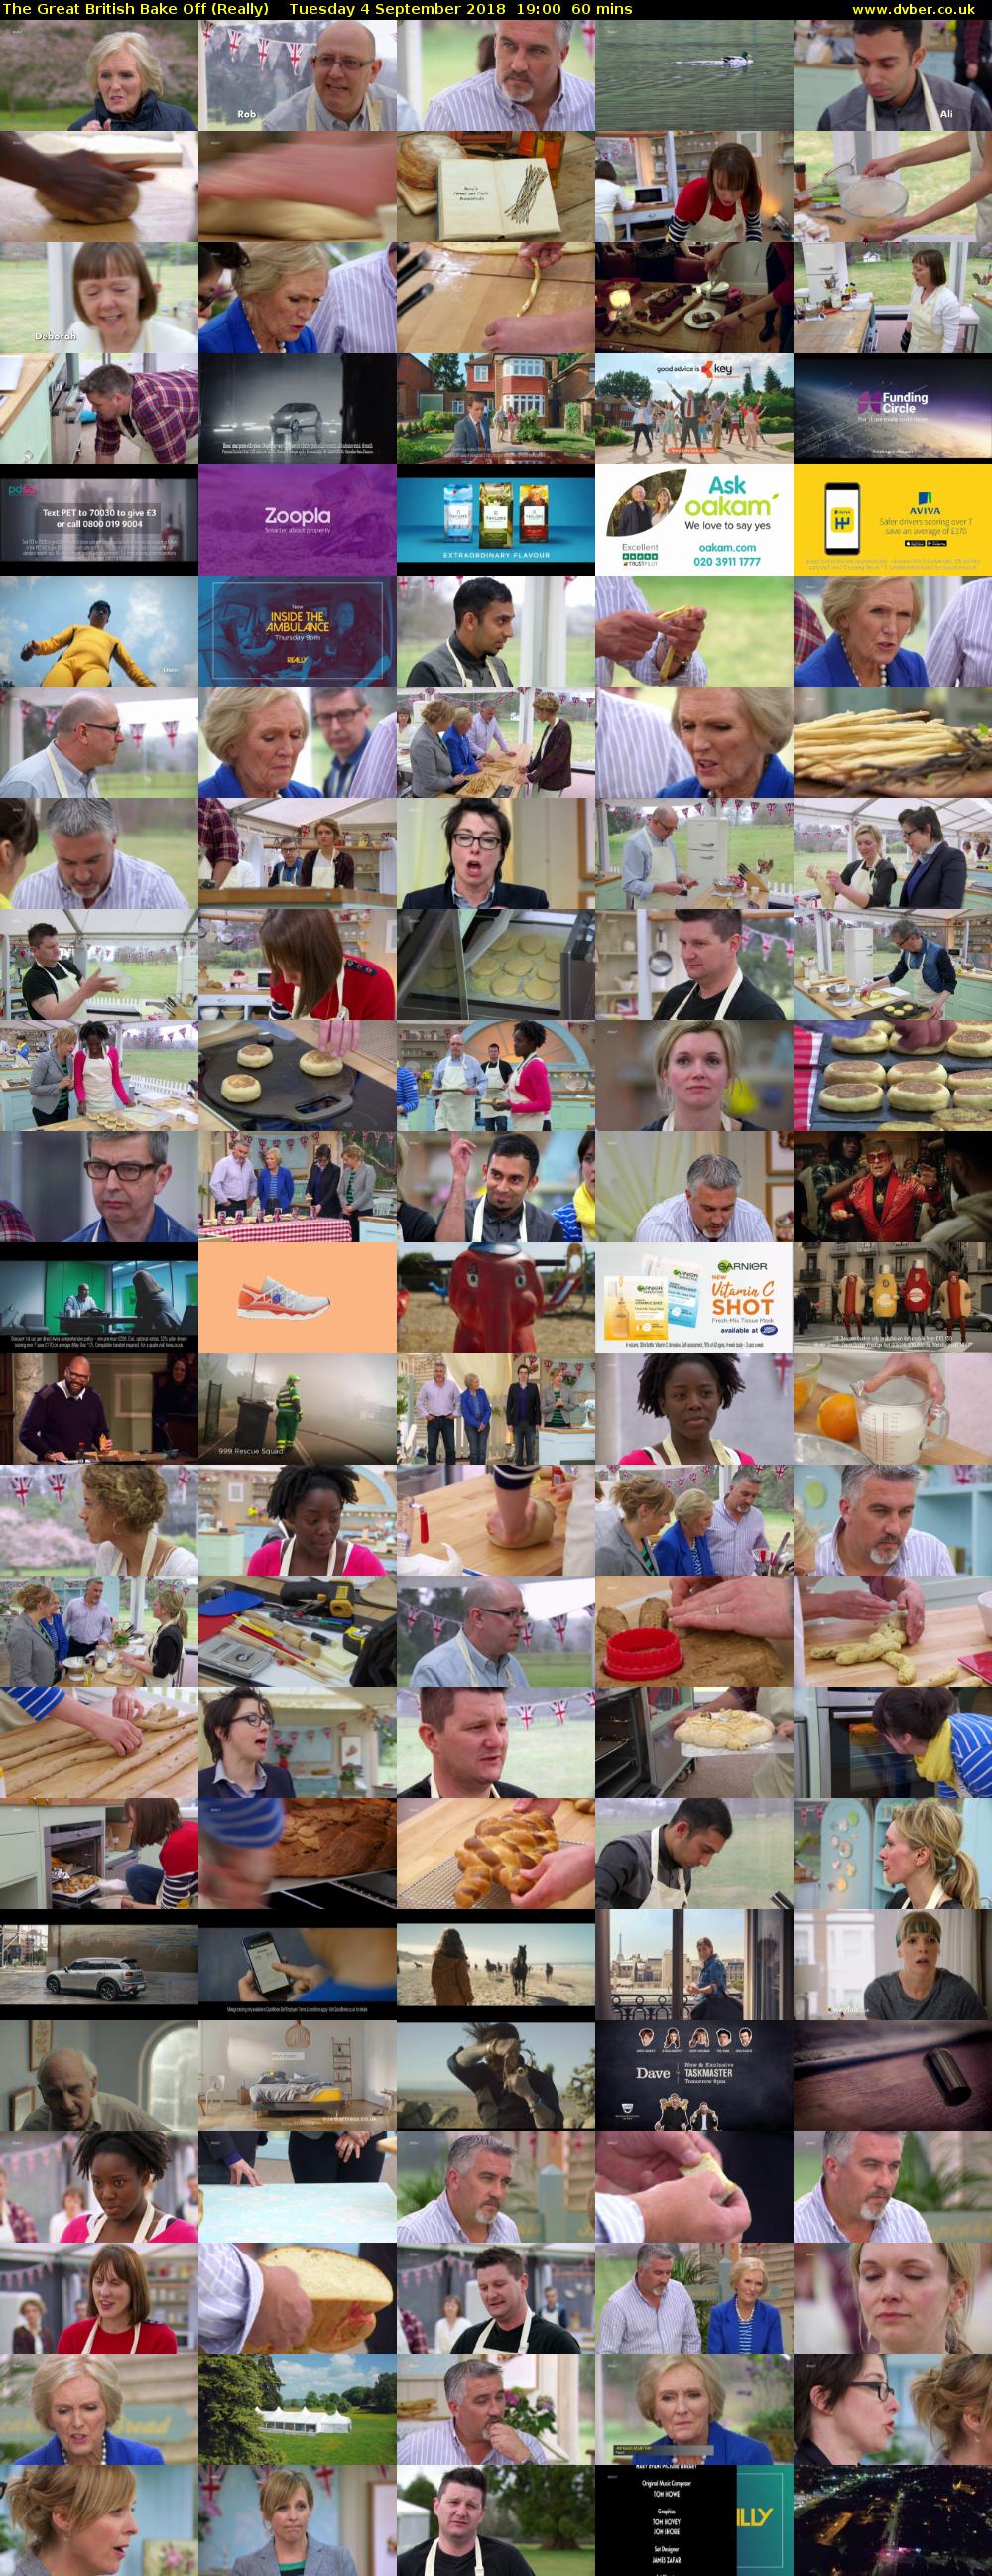 The Great British Bake Off (Really) Tuesday 4 September 2018 19:00 - 20:00